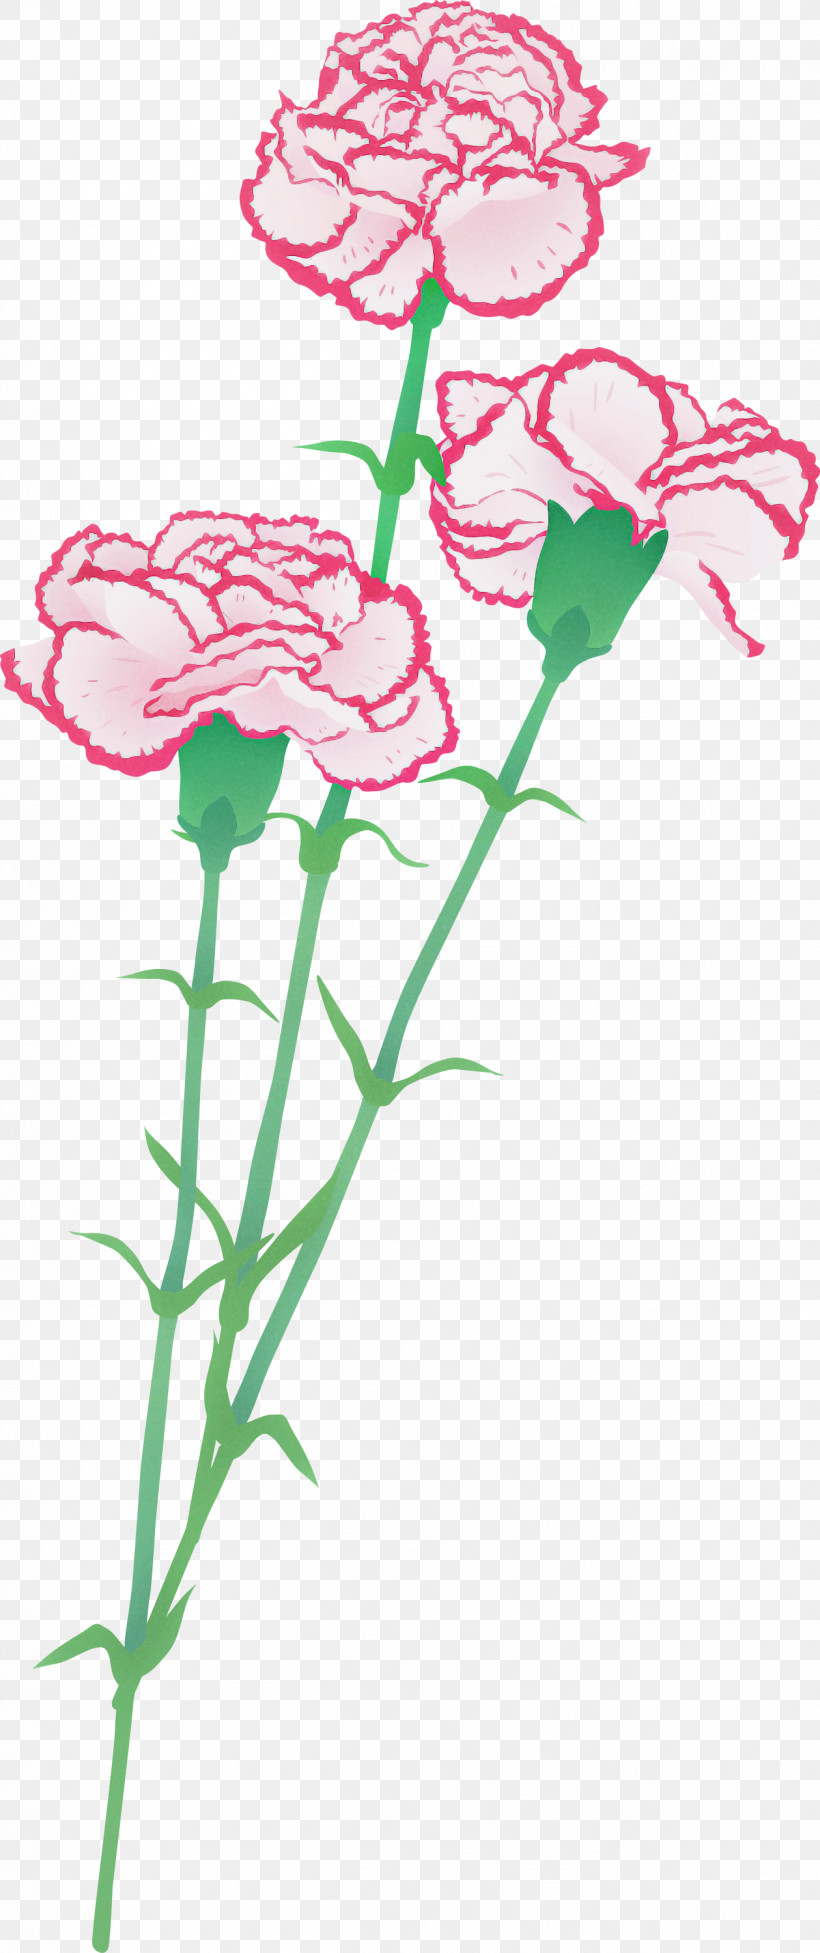 Flower Cut Flowers Pink Plant Carnation, PNG, 1259x2999px, Flower, Carnation, Cut Flowers, Dianthus, Pedicel Download Free